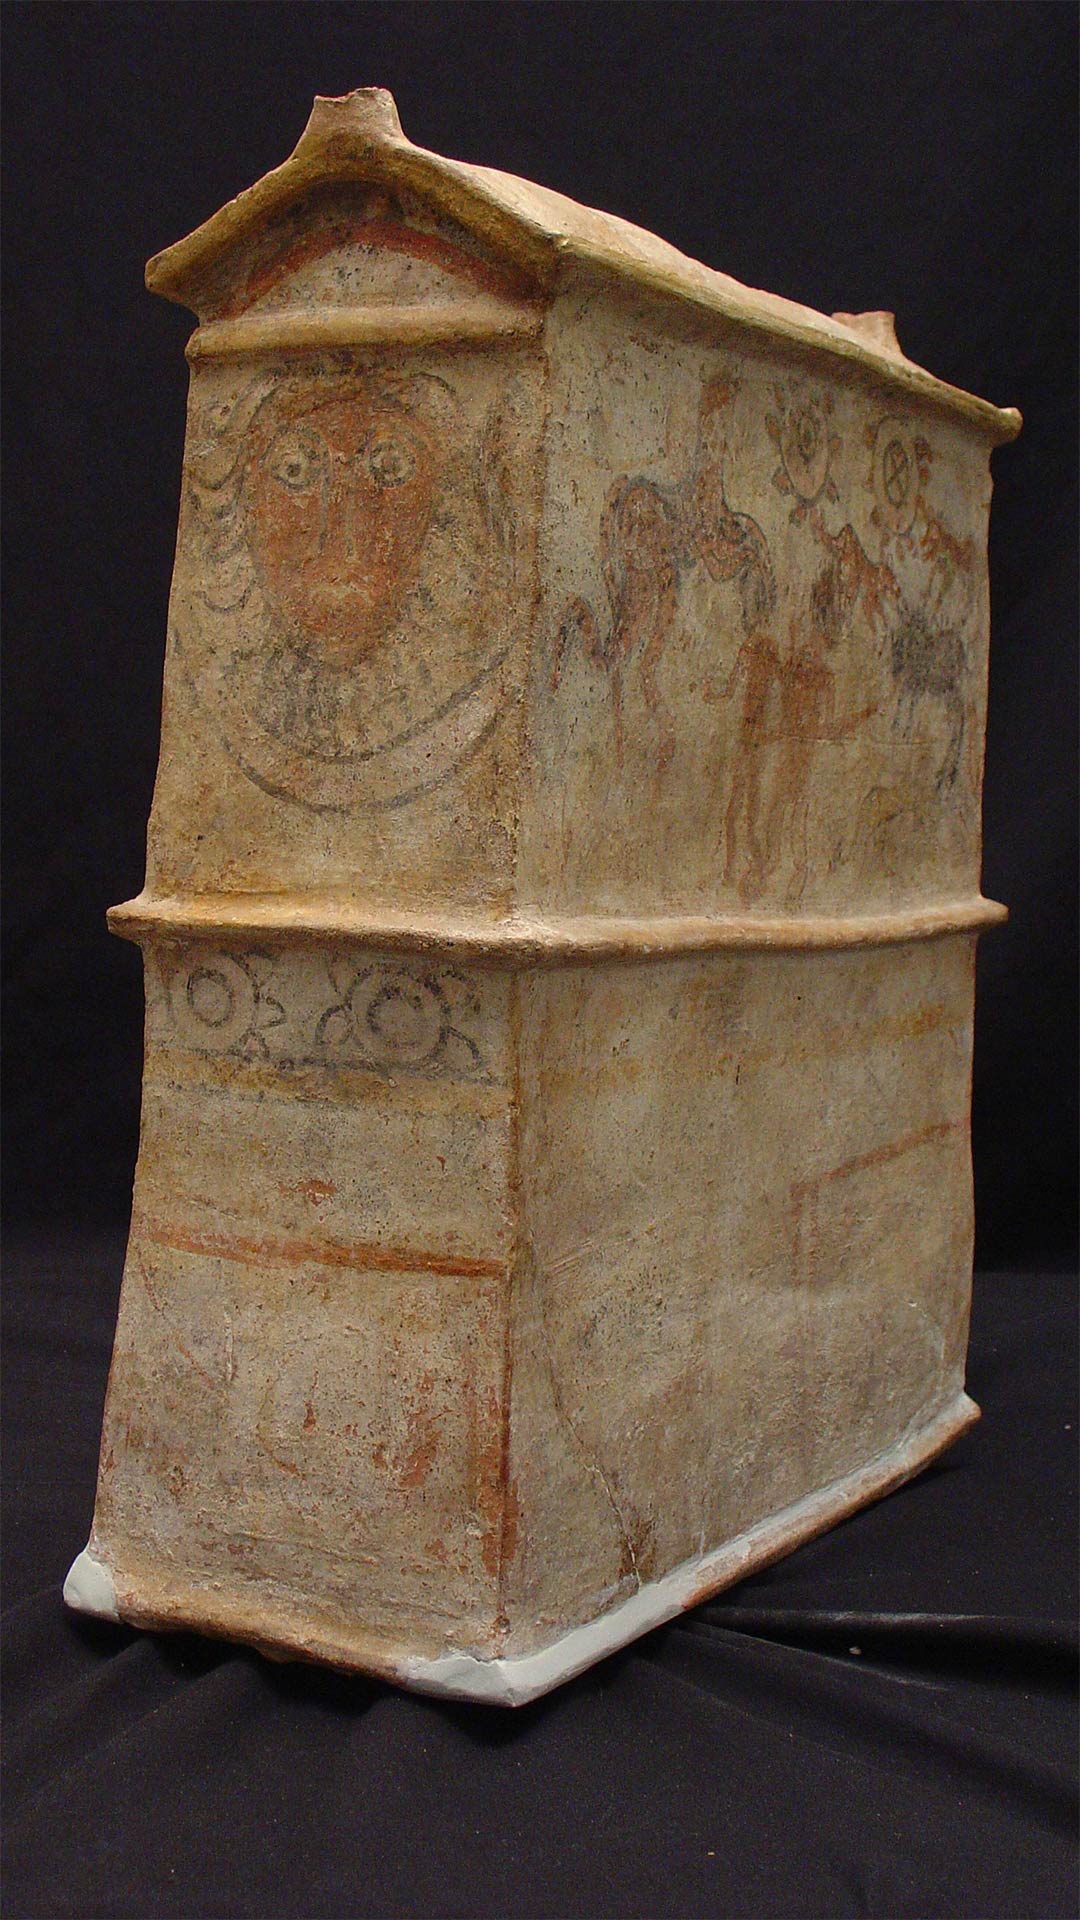 terracotta sarcophagus with a gorgon face painted on it, as well as a pair of humans surrounded by animals painted on the side